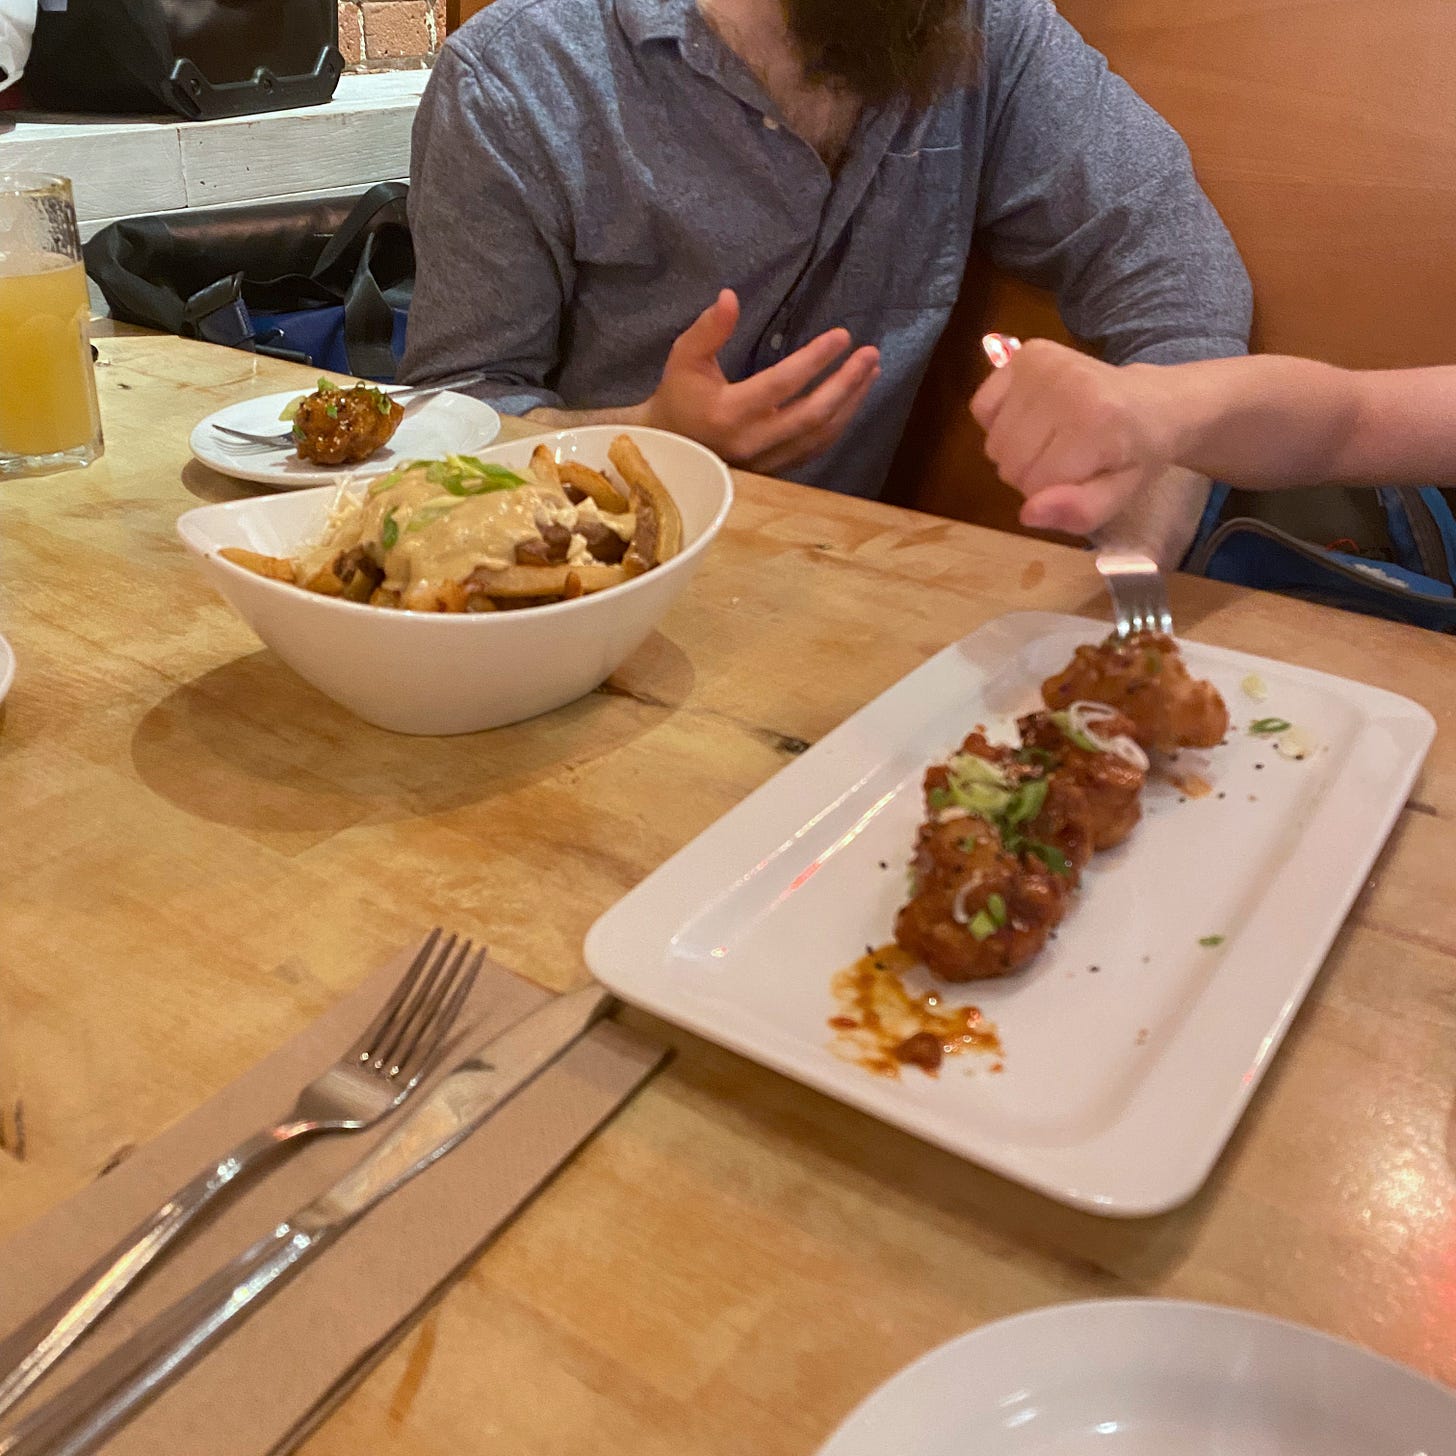 A rectangular plate of sweet chili cauliflower, dusted with green onions and sesame. Tyrion's hand sticks a fork into one piece. Next to it is an oblong bowl of poutine, and Jeff sits behind it, talking to Tyrion whose face is out of frame. In the foreground is a napkin set with a knife and fork, and the corner of a small side plate is visible.